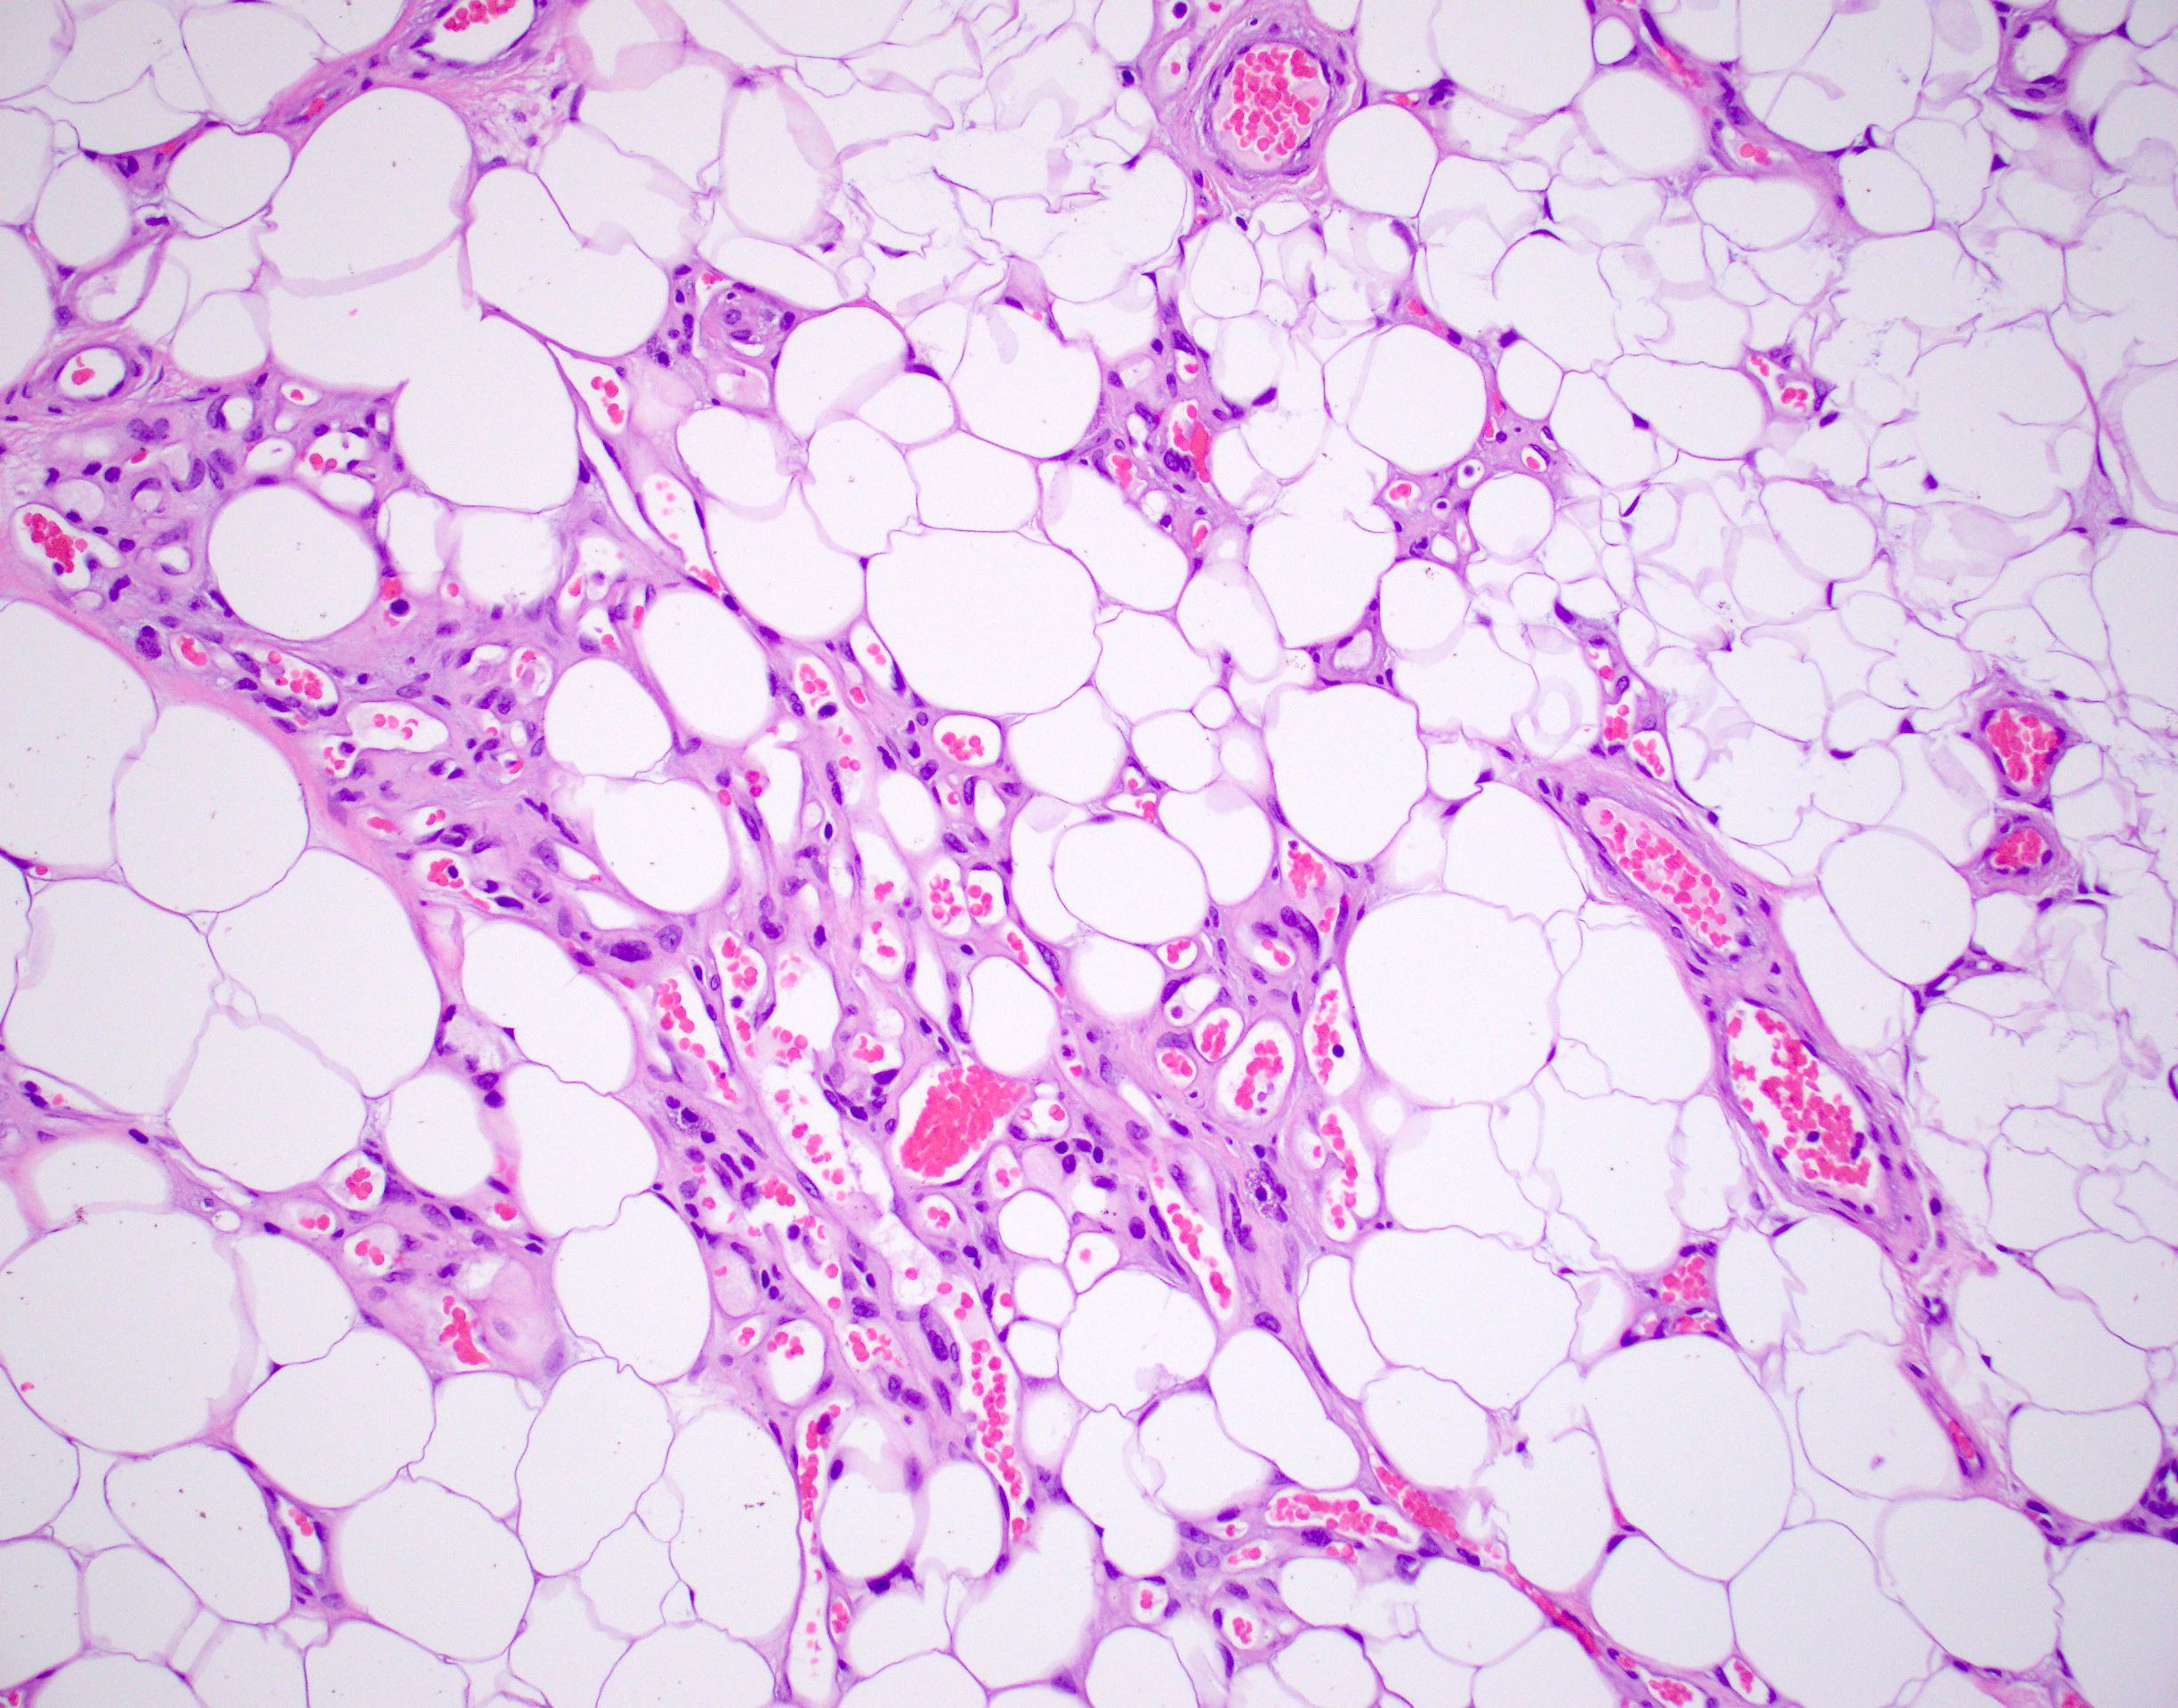 Mature adipose tissue with vessels